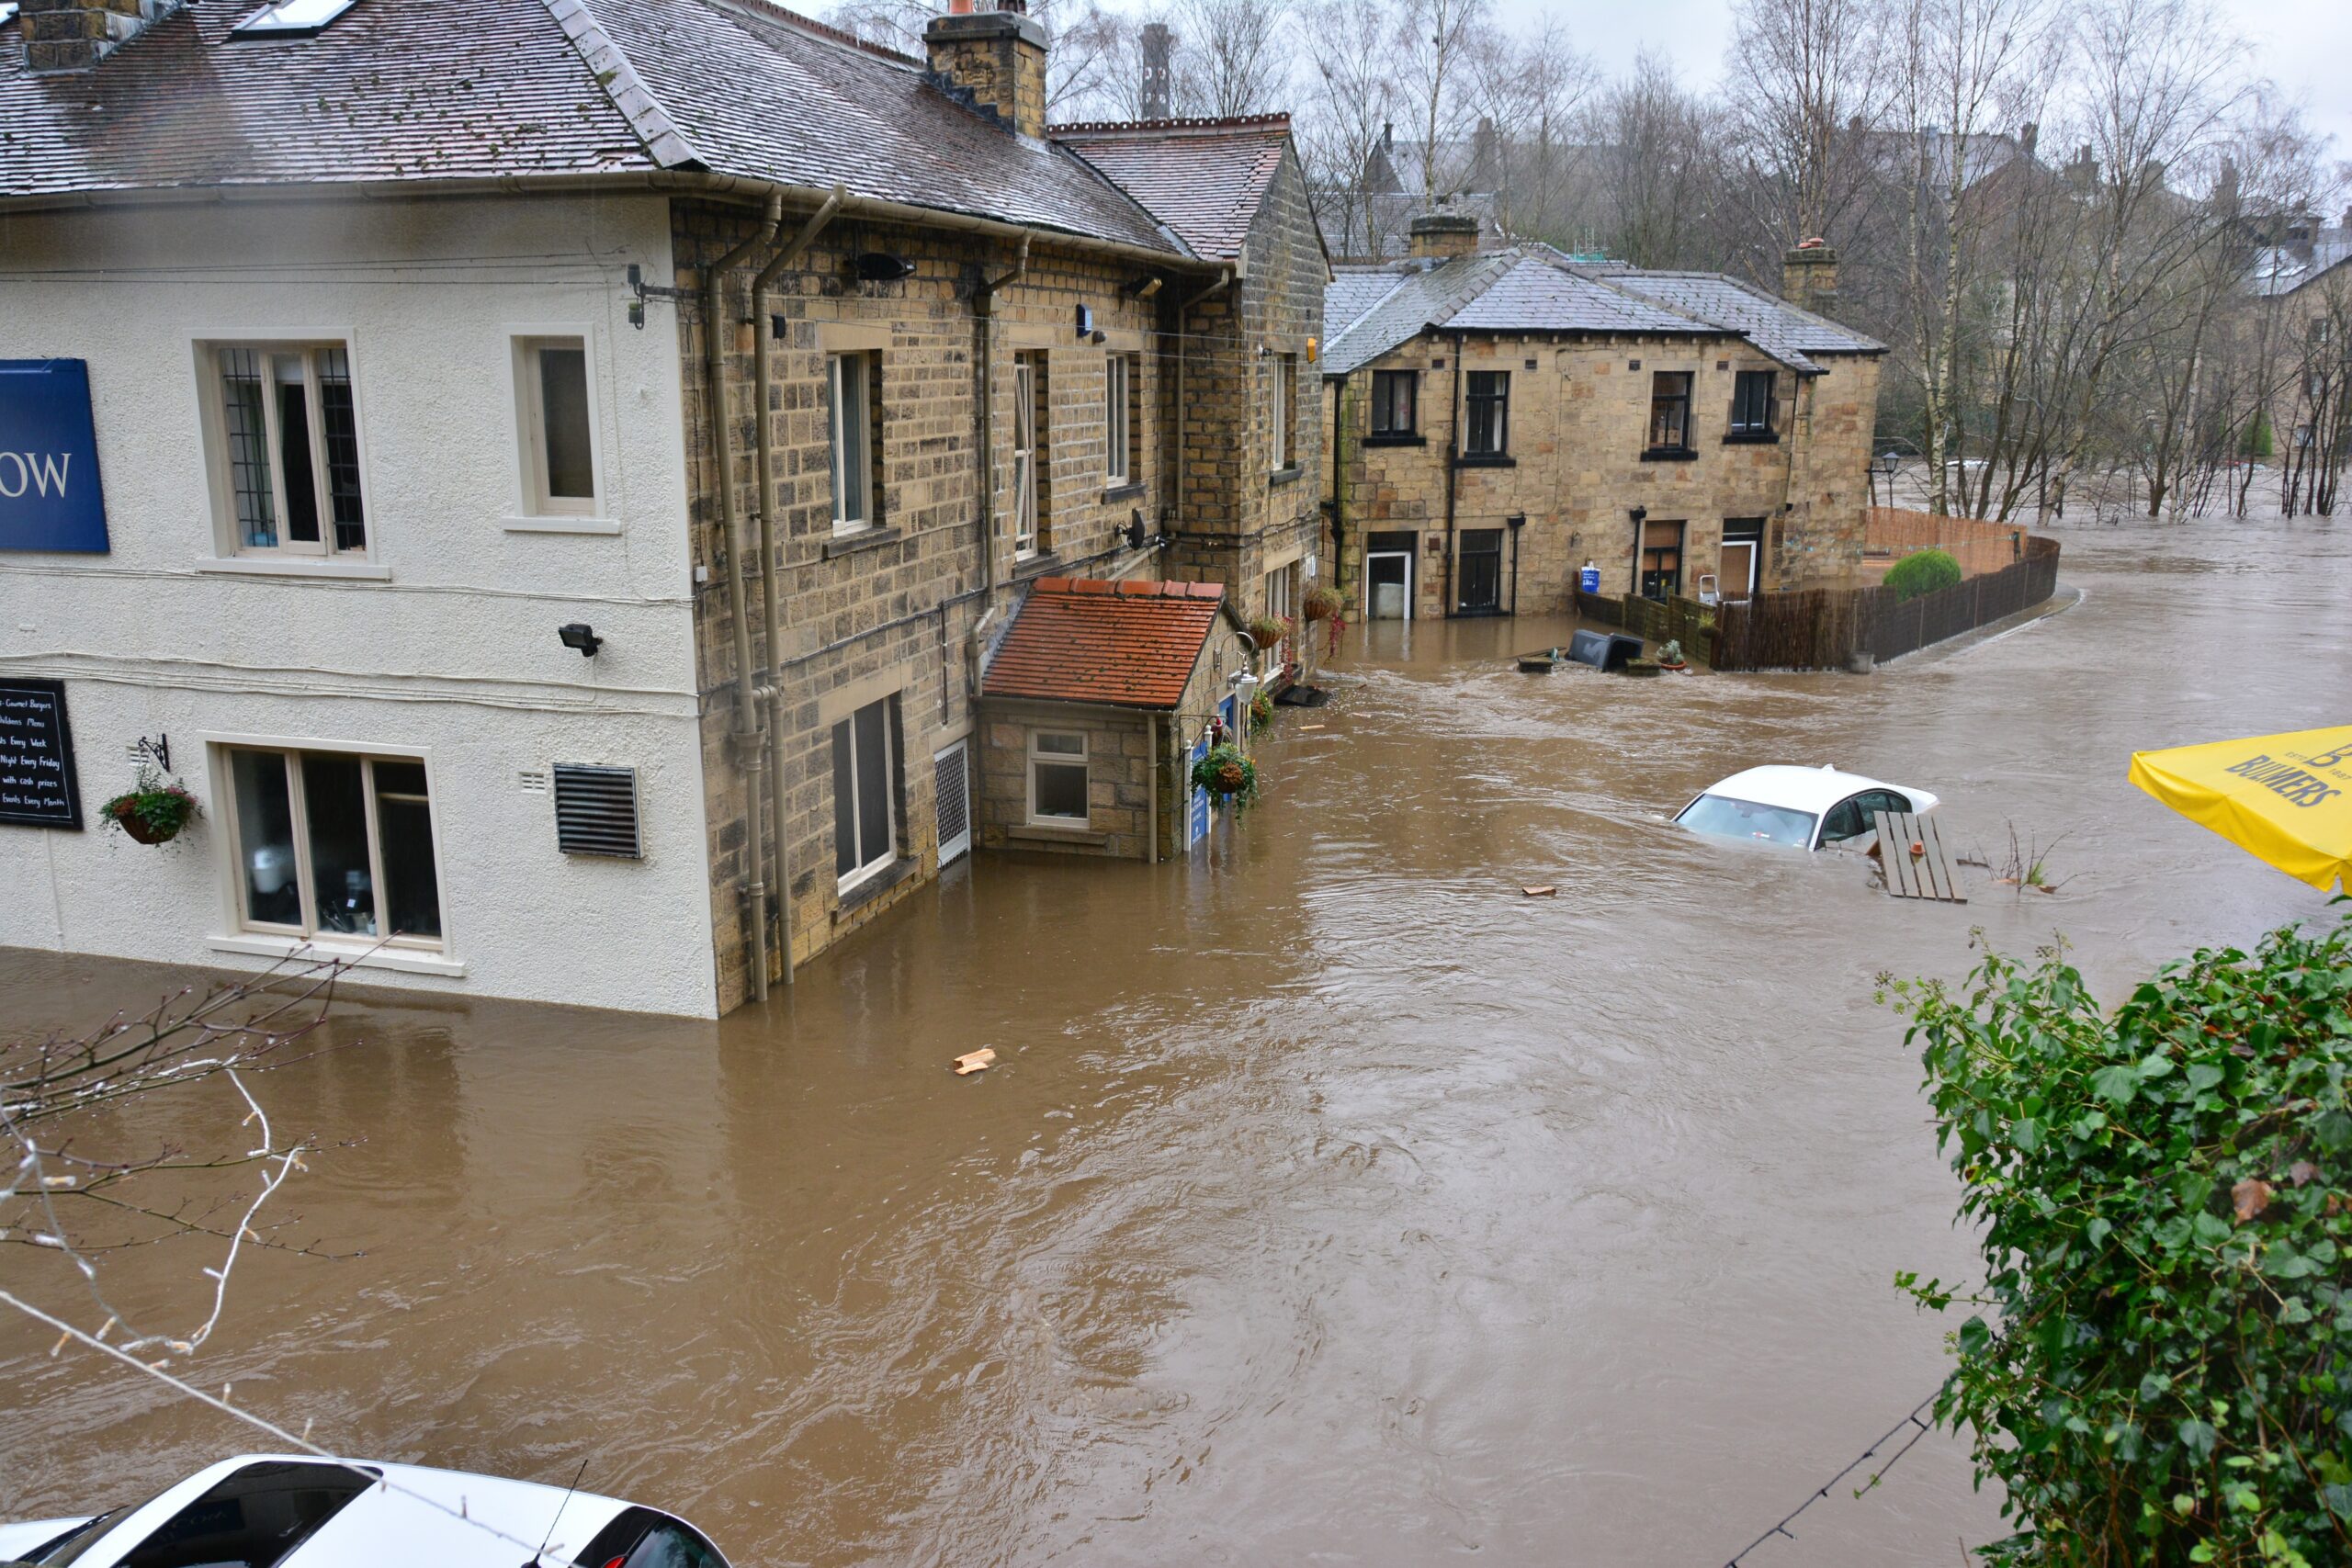 Is it safe to travel to Tuscany by motorhome at the moment, considering the recent floods?